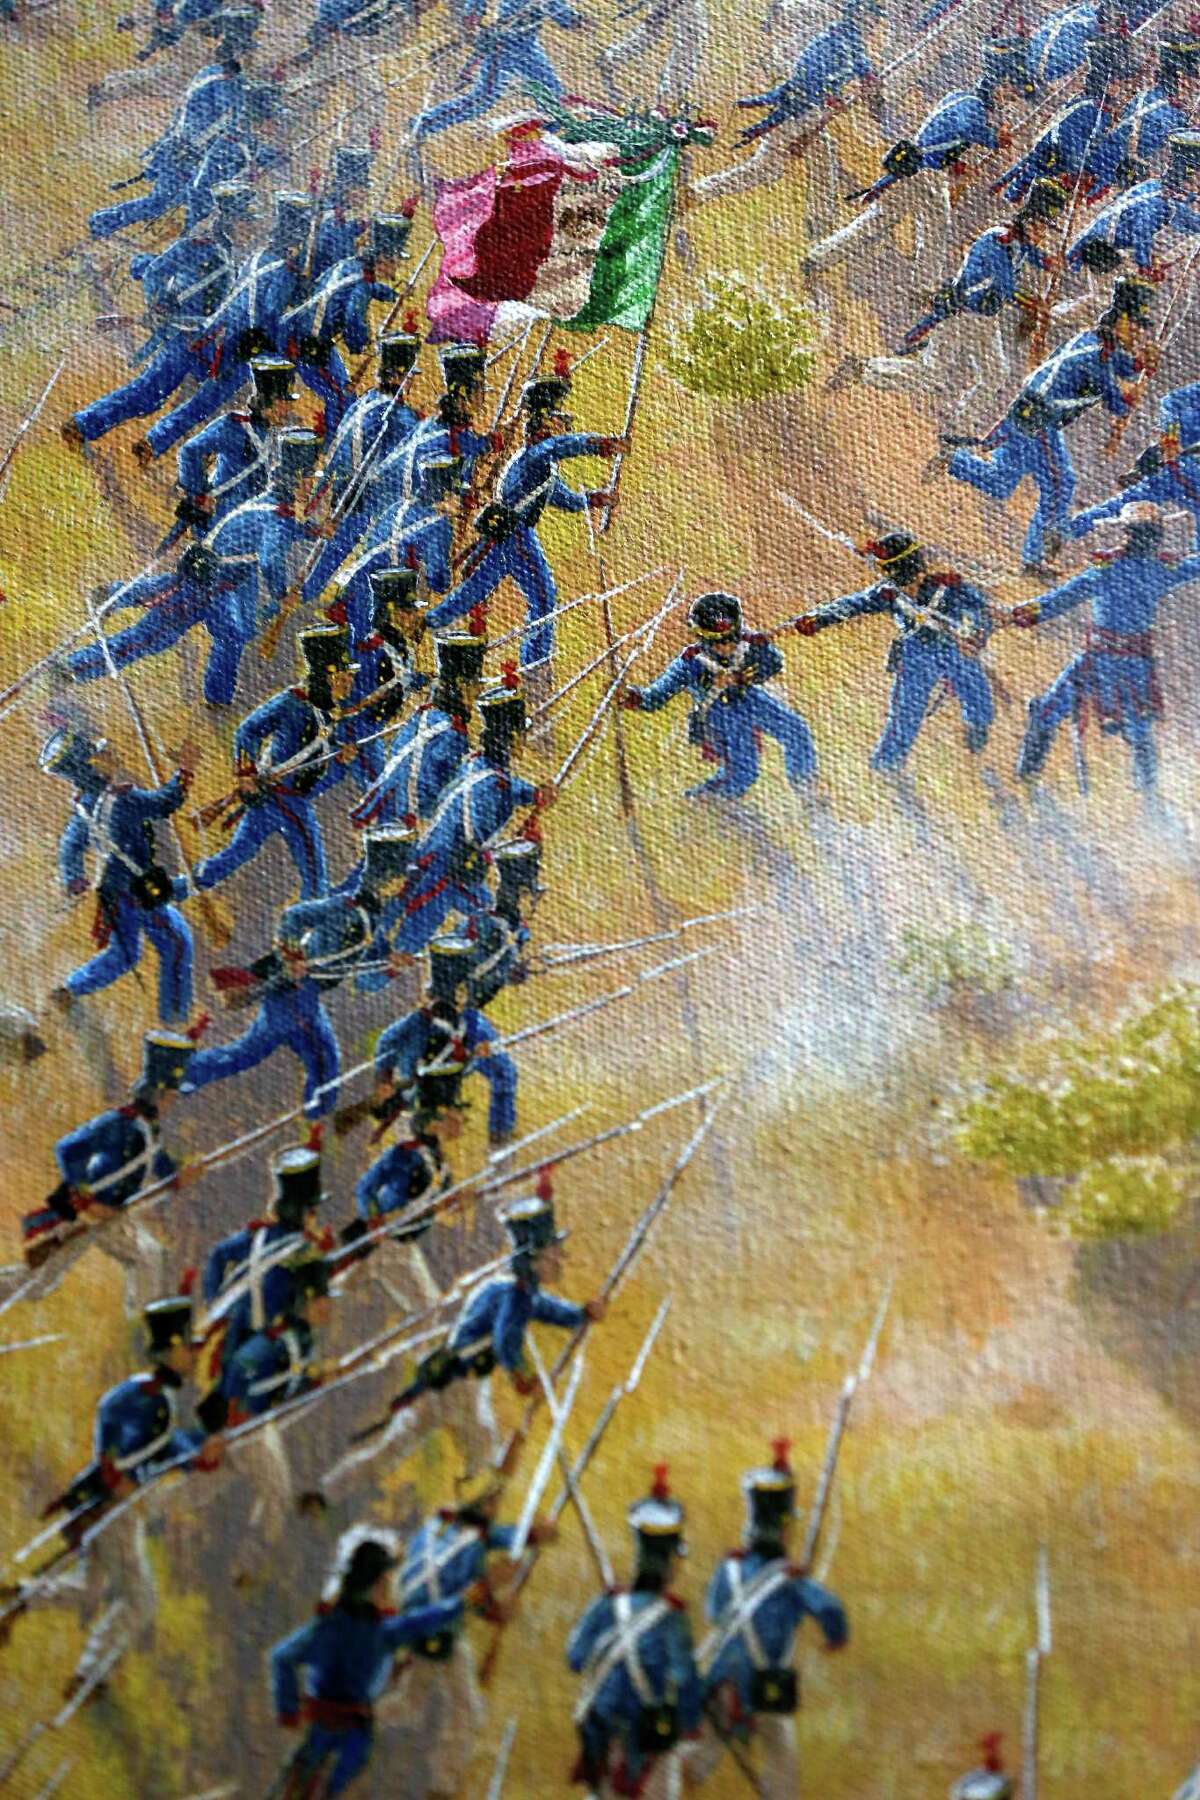 A detail is seen Thursday Match 5, 2015 of artist Mark Lemon, one of the leading modern artists whose works focus on the Alamo mission and battle site, titled ÒThe Storming of the Alamo, March 6, 1836,Ó said to be the largest, most historically accurate detailed painting of the battle, at 8 feet tall and 15 feet wide. Lemon said it took him about 3,500 hours over 14 months to do the work.